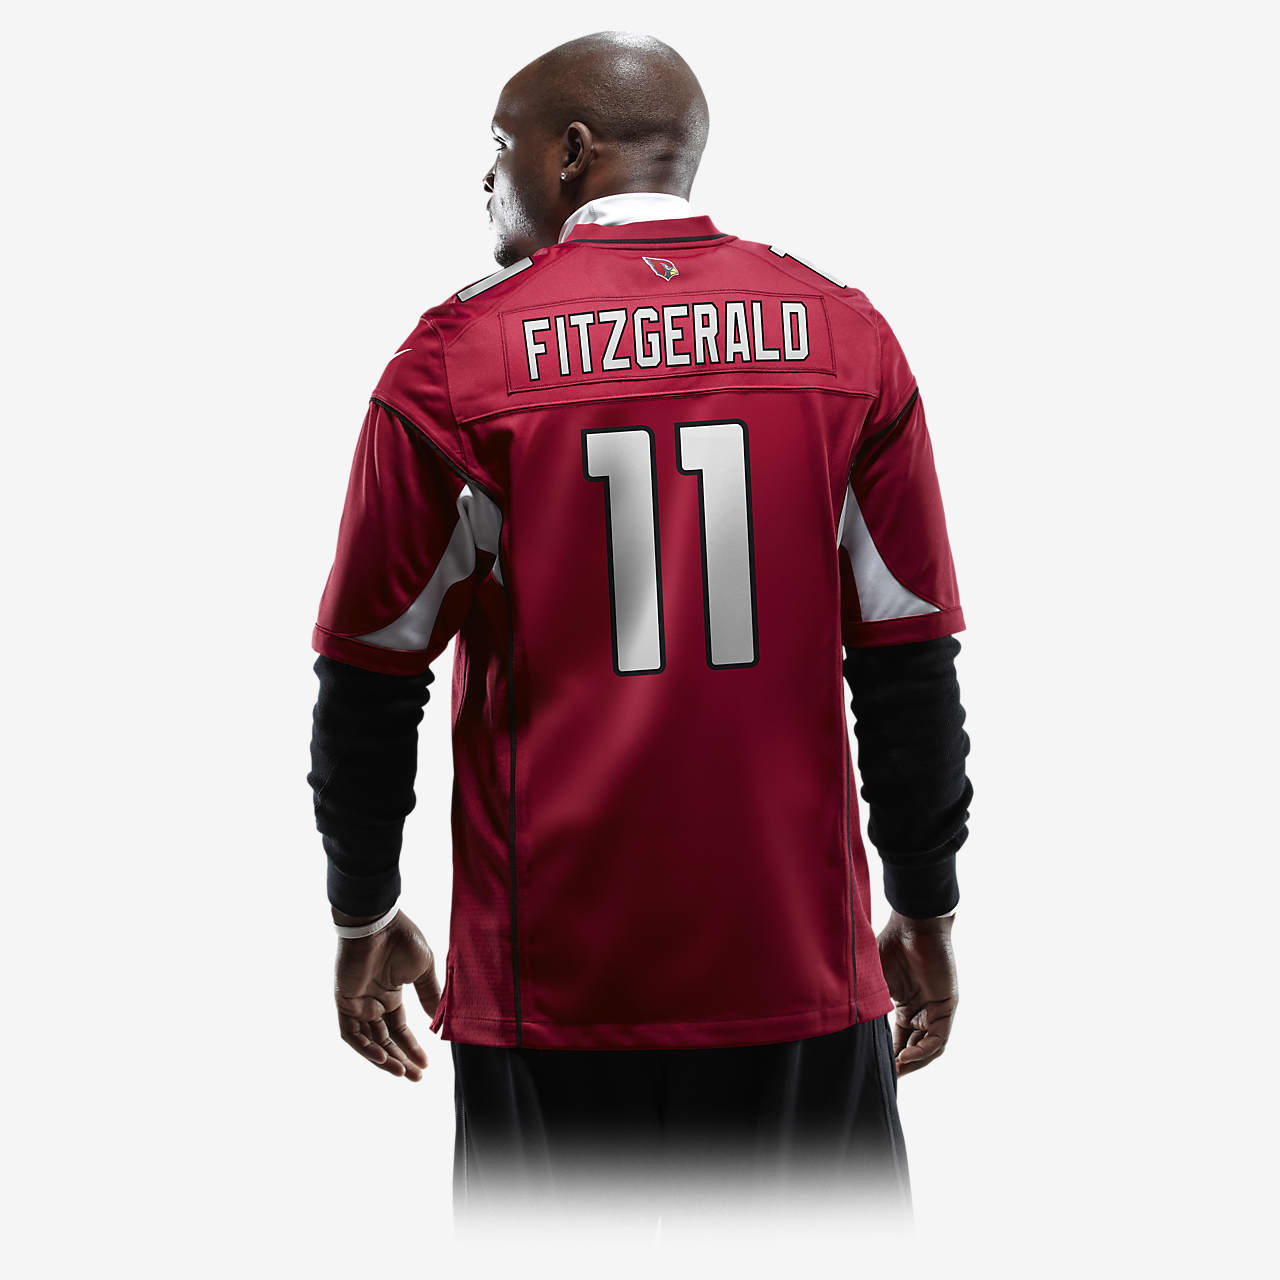 larry fitzgerald boys jersey Cheap Sell - OFF 63%